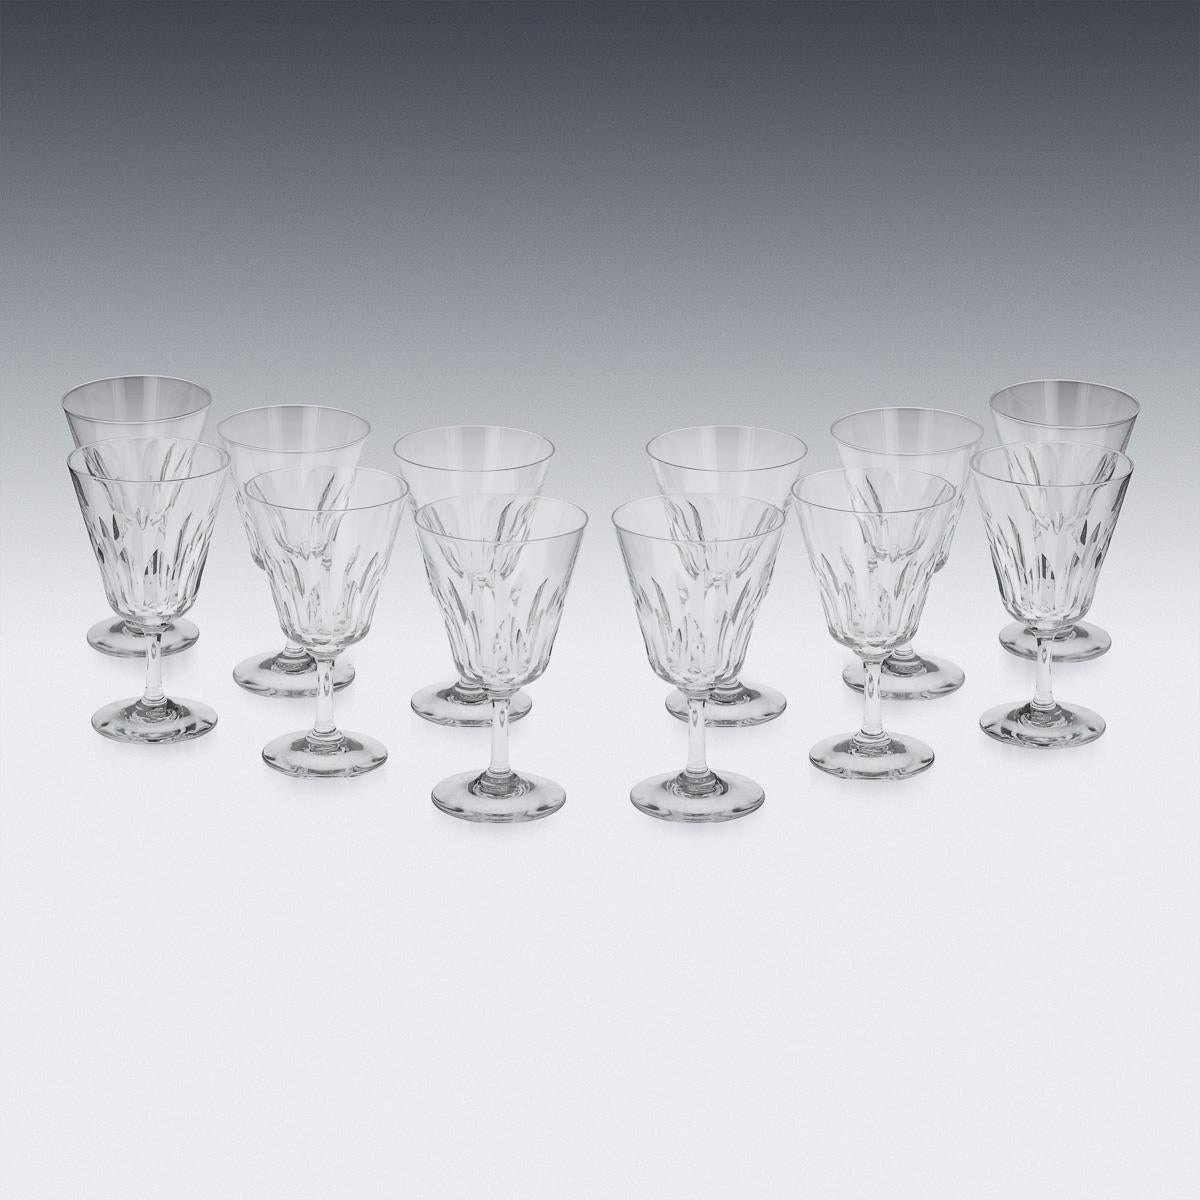 A stunning set of crystal drinking glasses made by the world renowned glass manufacturer Baccarat, France around the middle of the 20th century. This stunning set comprises of twelve red wine glasses, twelve white wine glasses and twelve glasses for